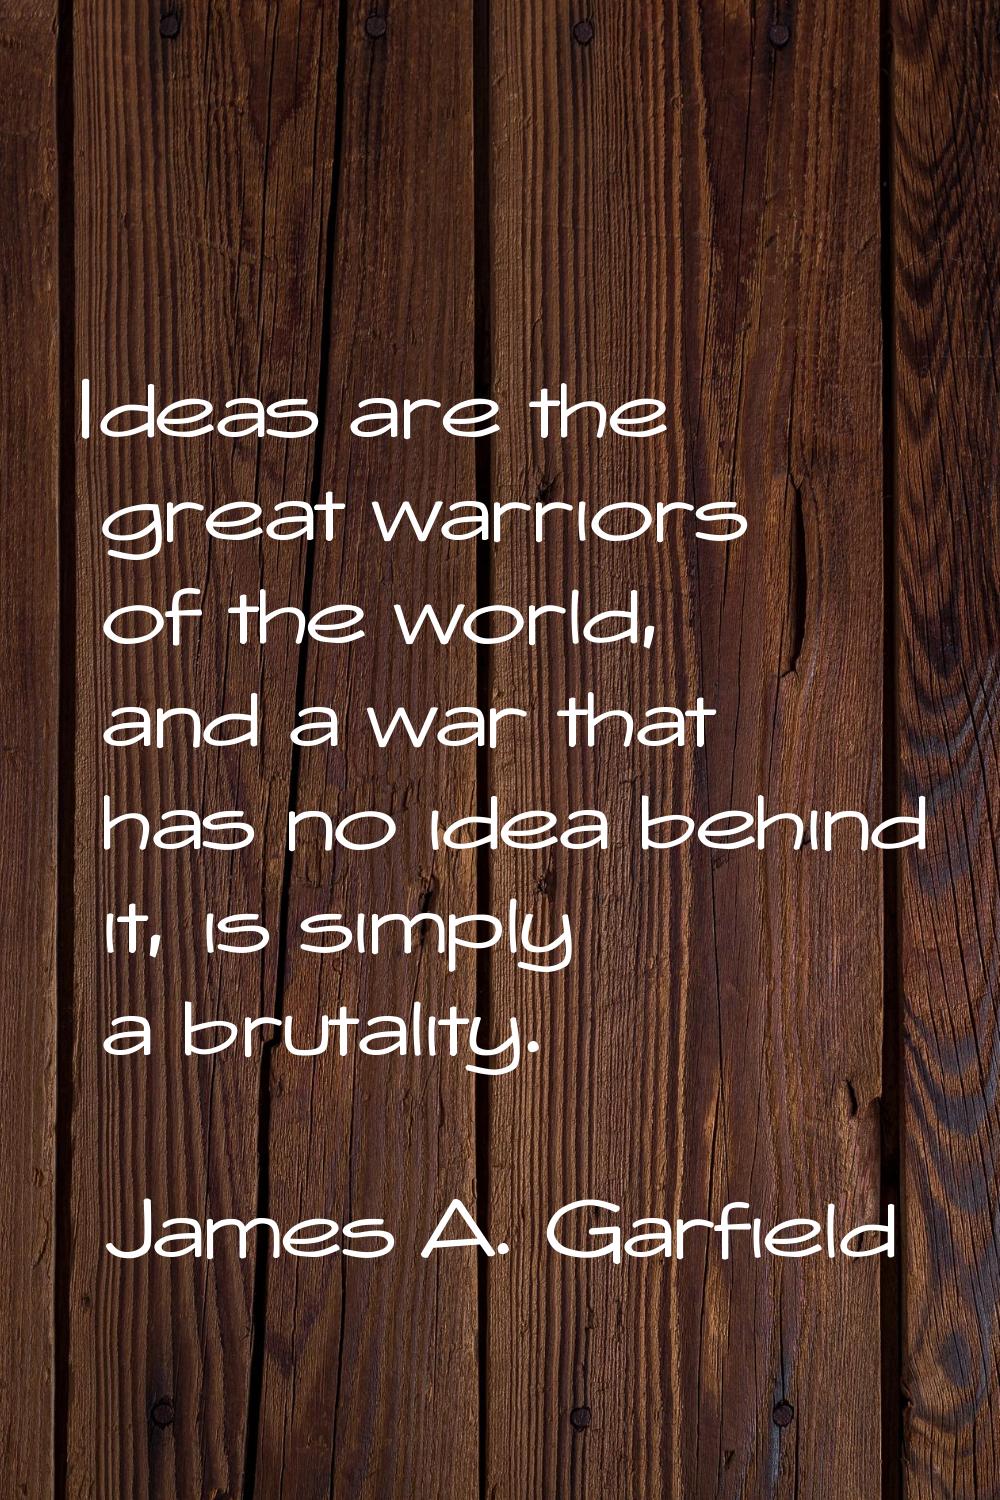 Ideas are the great warriors of the world, and a war that has no idea behind it, is simply a brutal